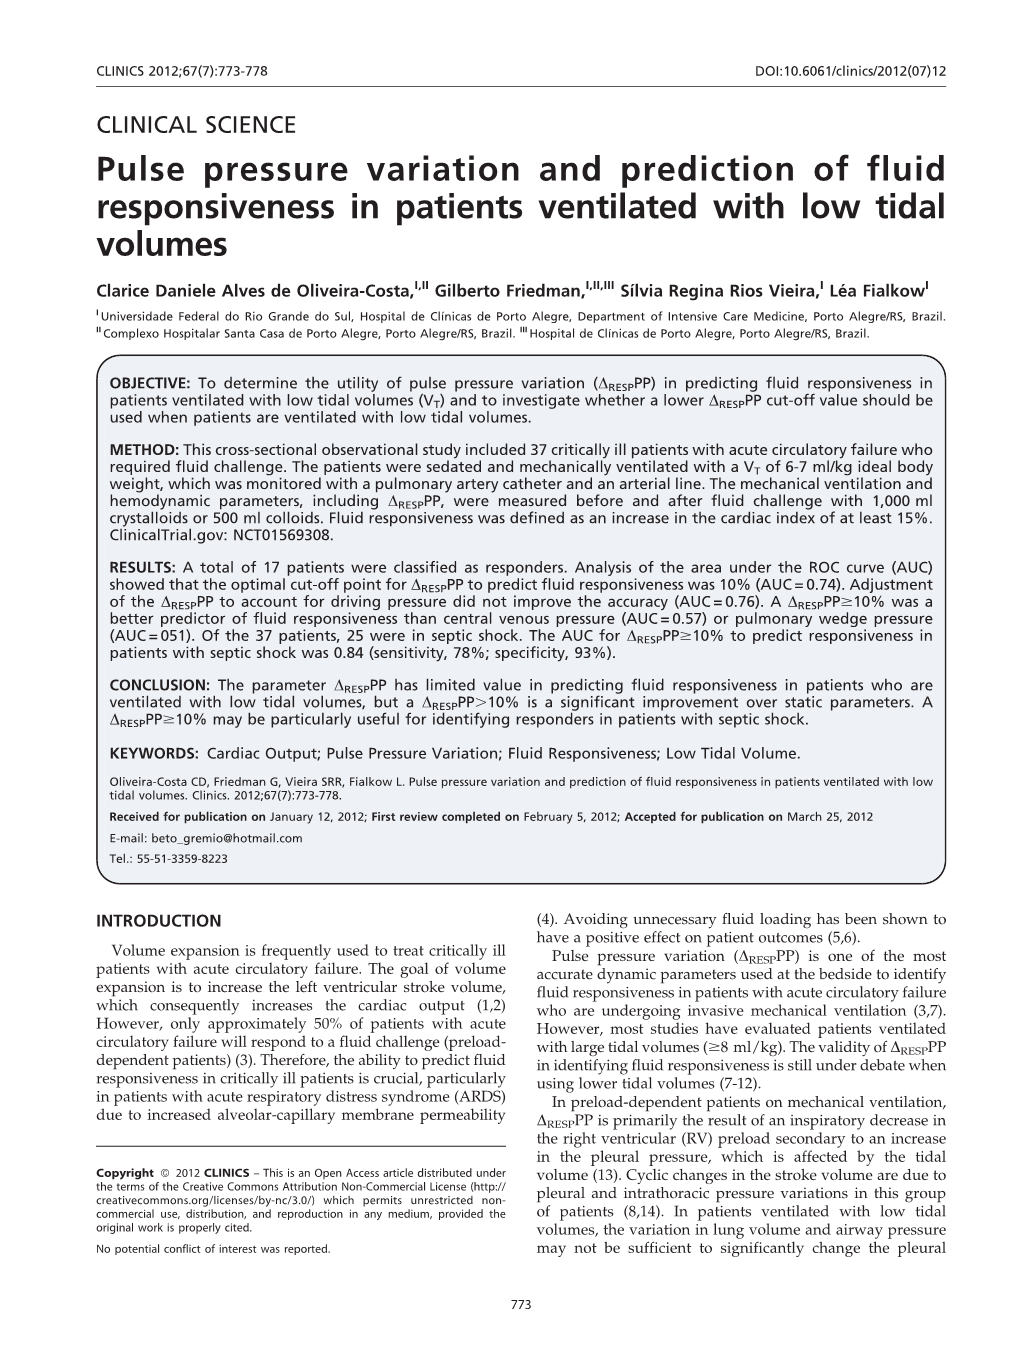 Pulse Pressure Variation and Prediction of Fluid Responsiveness in Patients Ventilated with Low Tidal Volumes